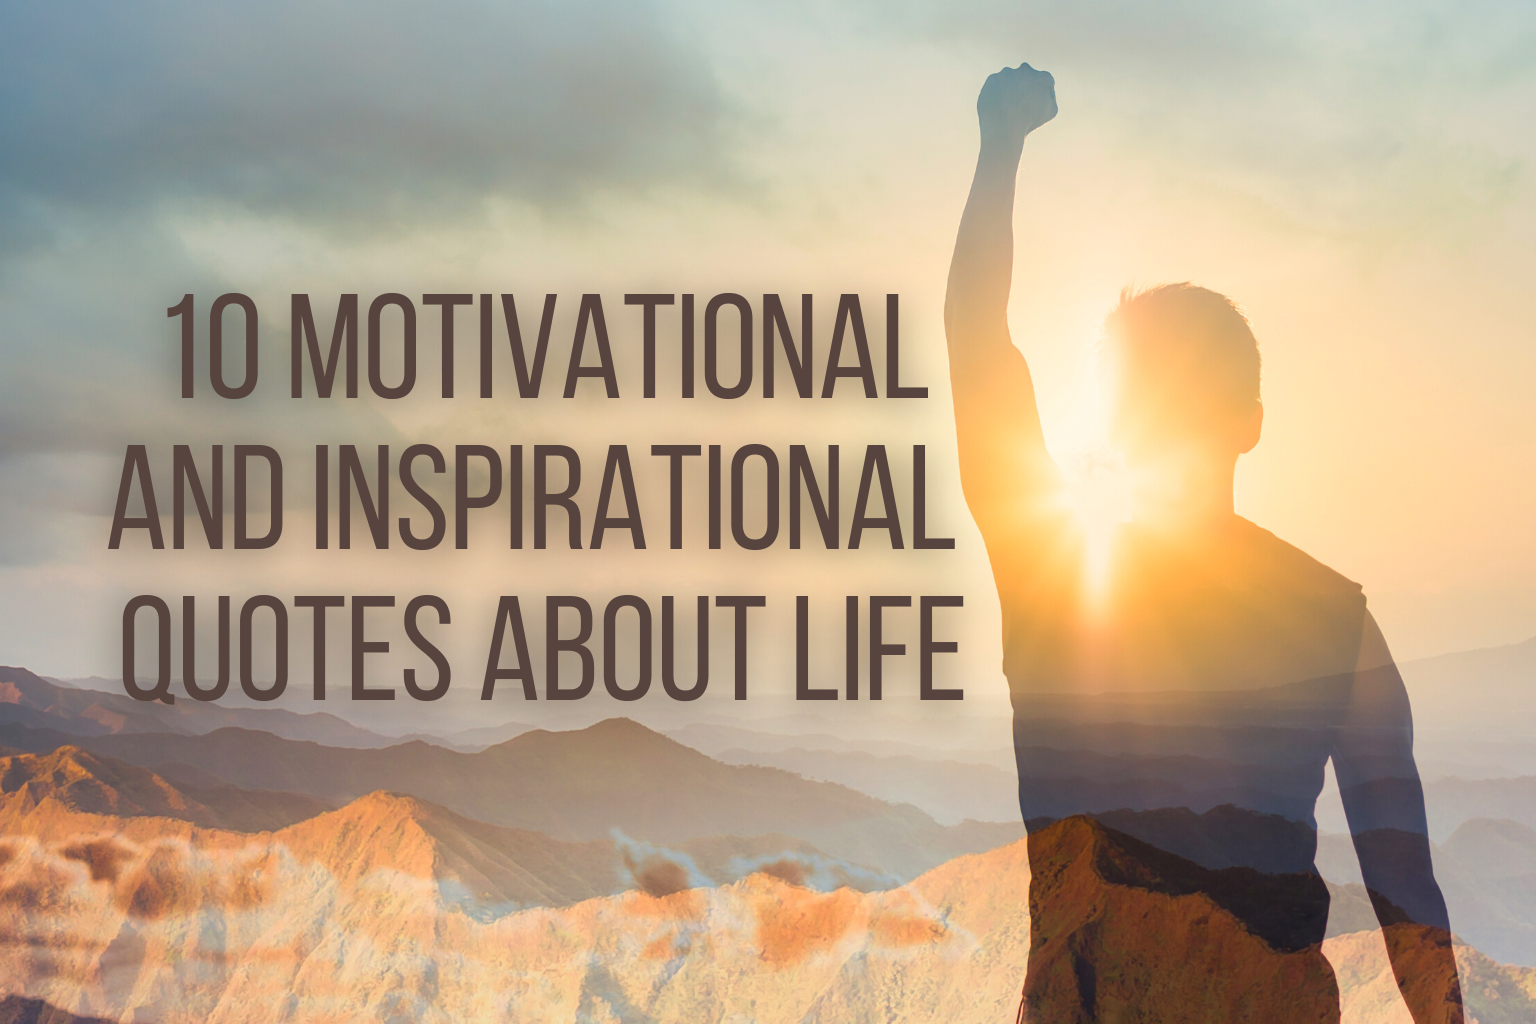 10 Motivational And Inspirational Quotes About Life, in2vortex.com, the law of attraction quotes